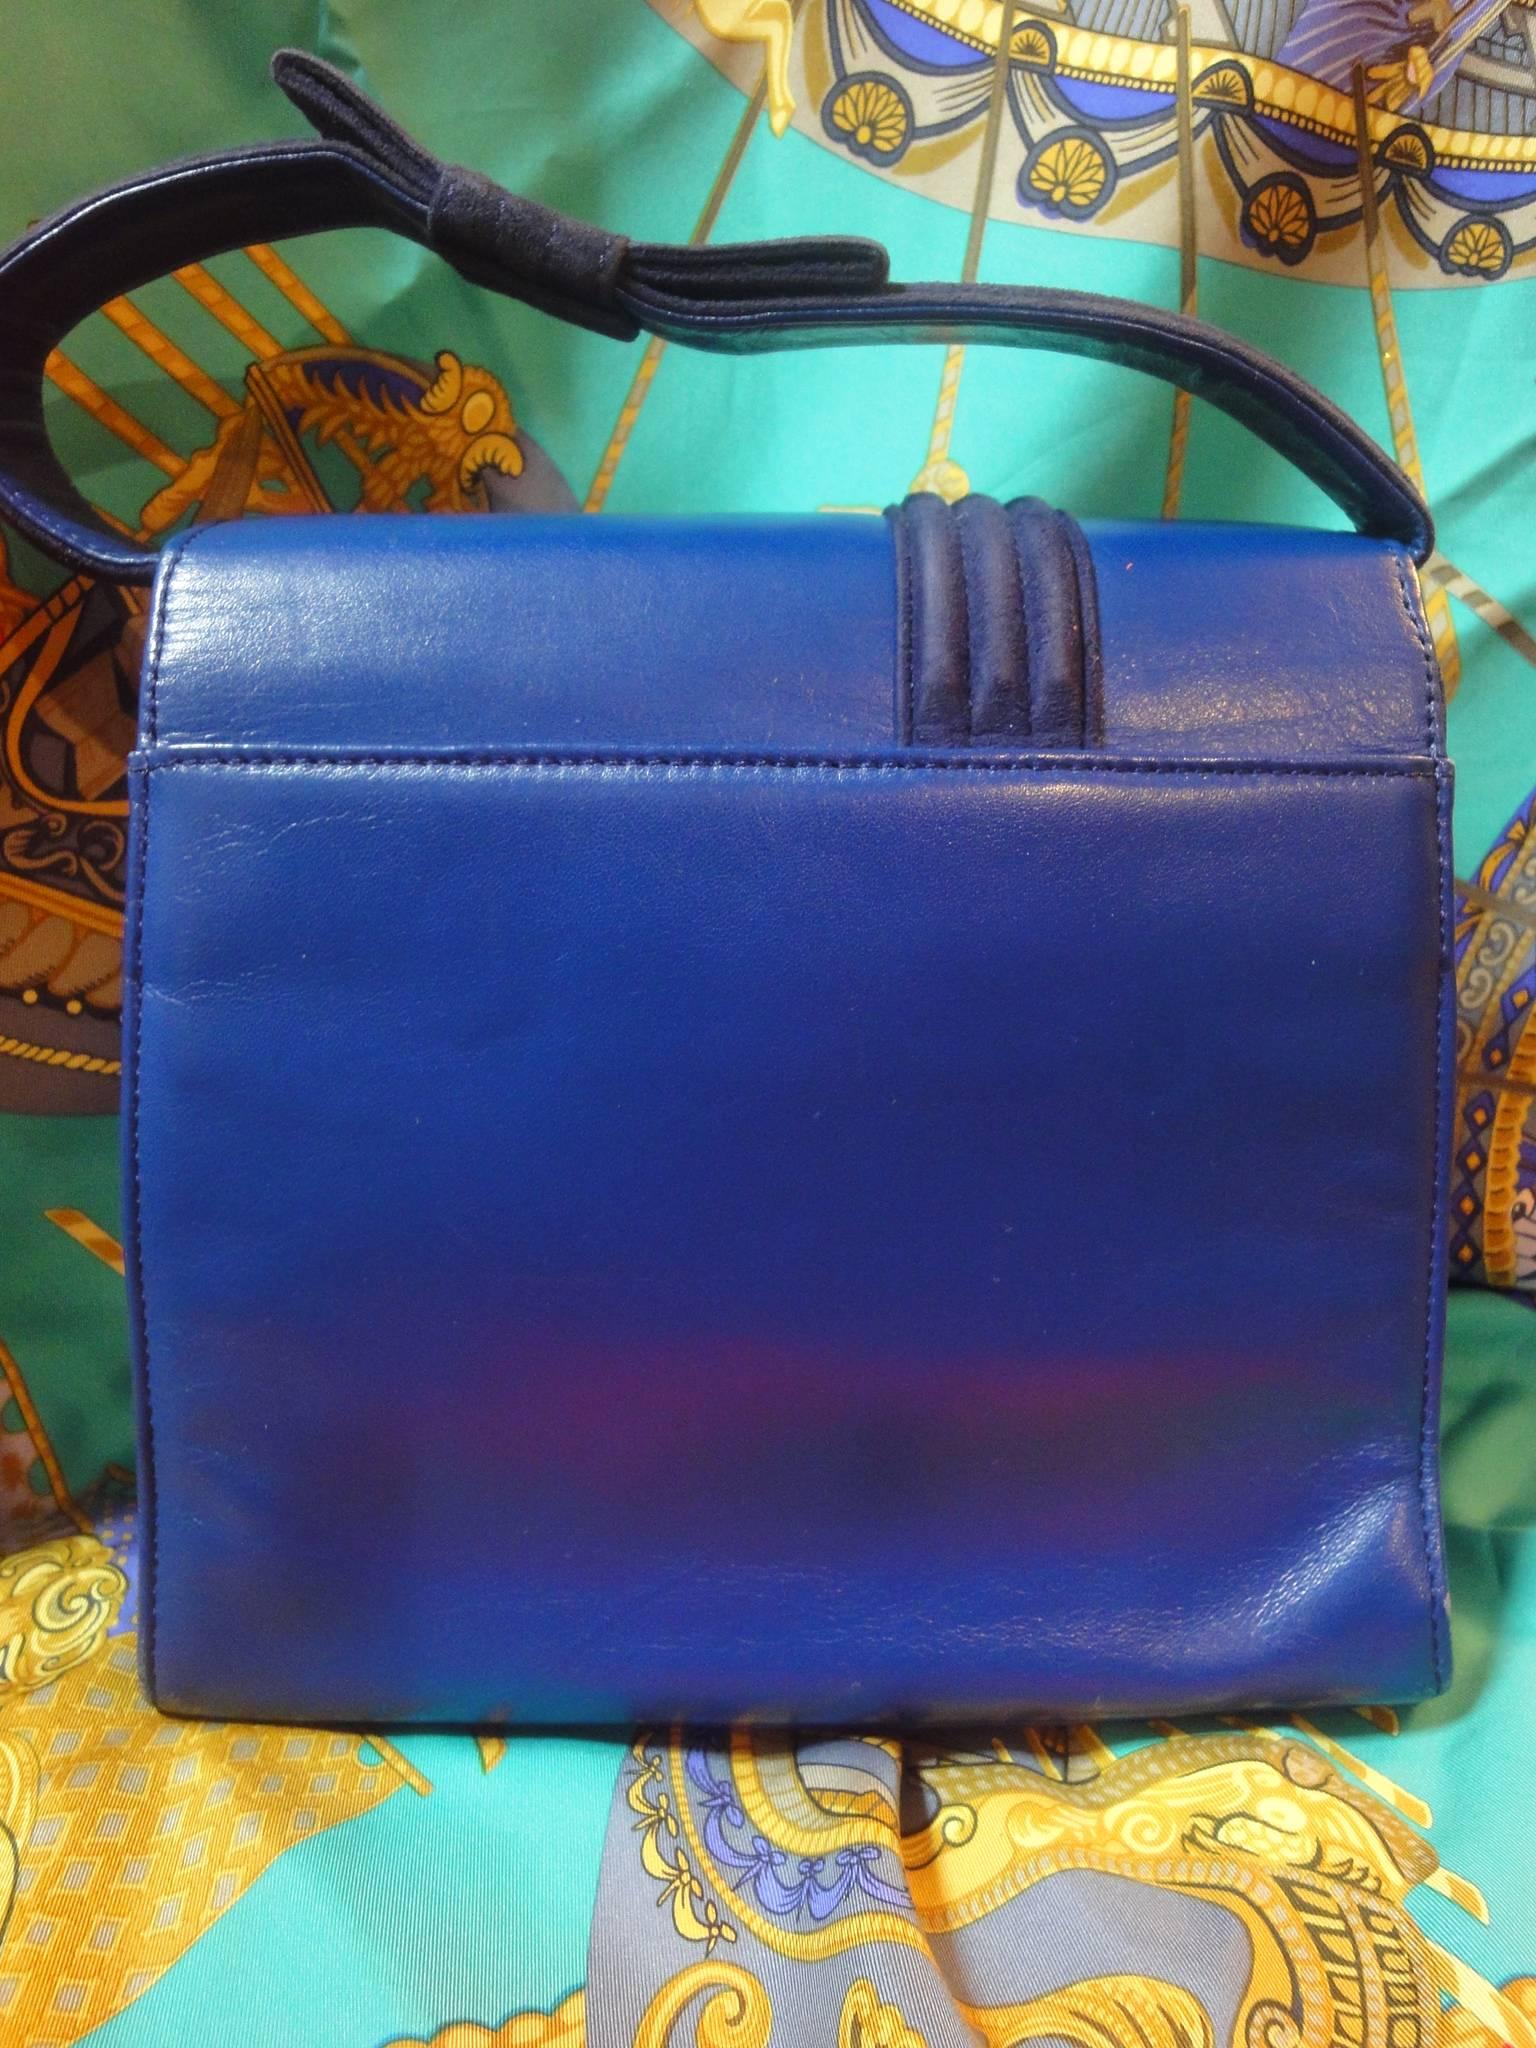 Vintage Gianni Versace blue smooth and suede leather handbag purse with a bow. Gaga and chic style.

If you are a vintage Gianni Versace lover or looking for a rare piece, then this is the must-have piece for sure!
Vintage handbag in blue leather